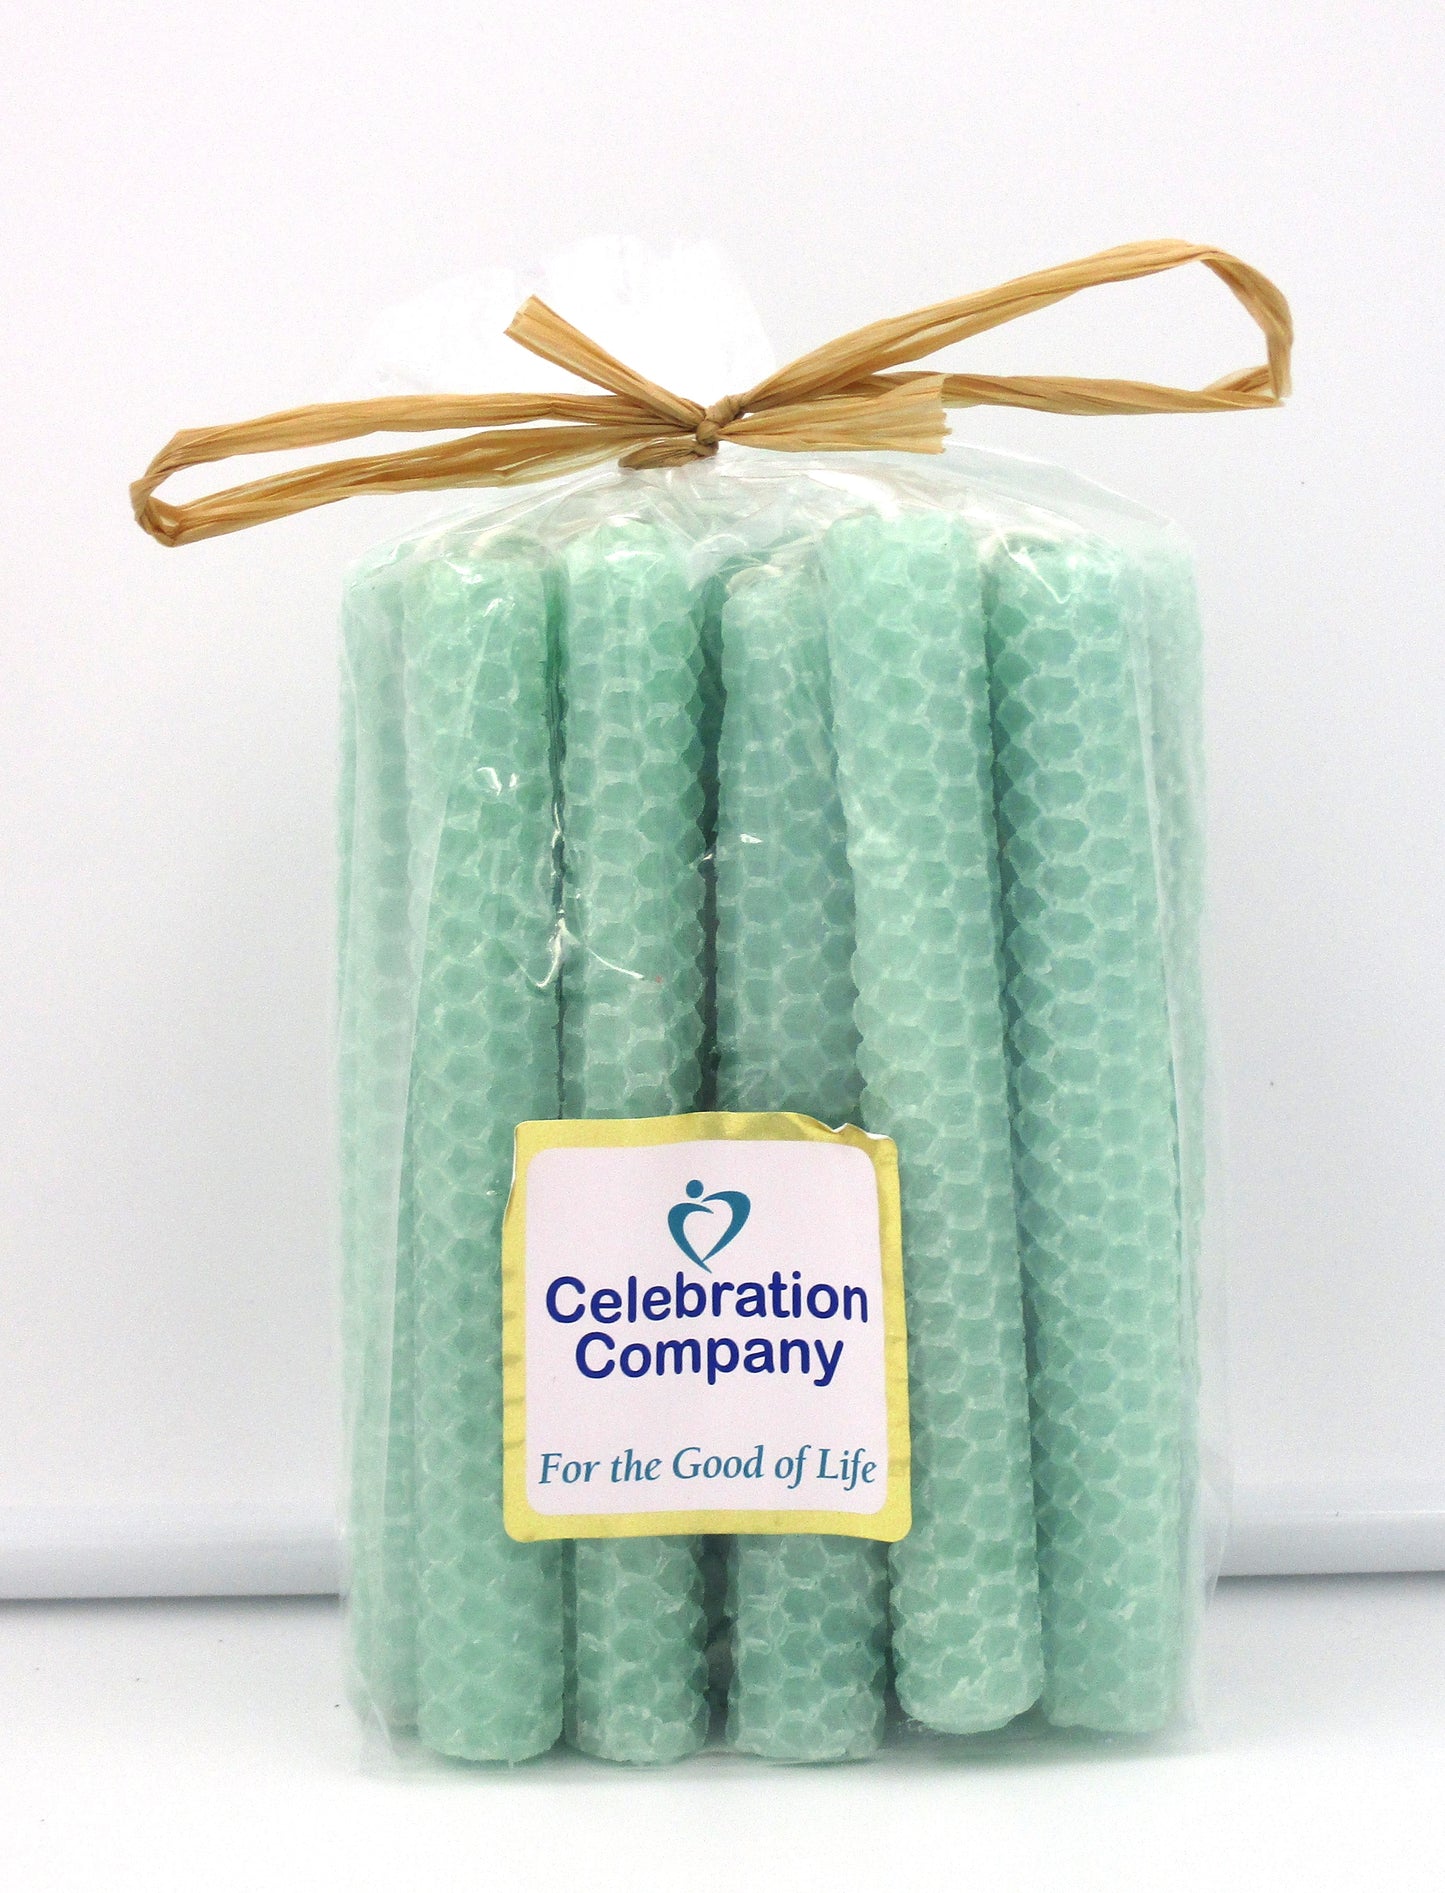 Package of 16 aqua Shabbat candles in clear package with top tied off.